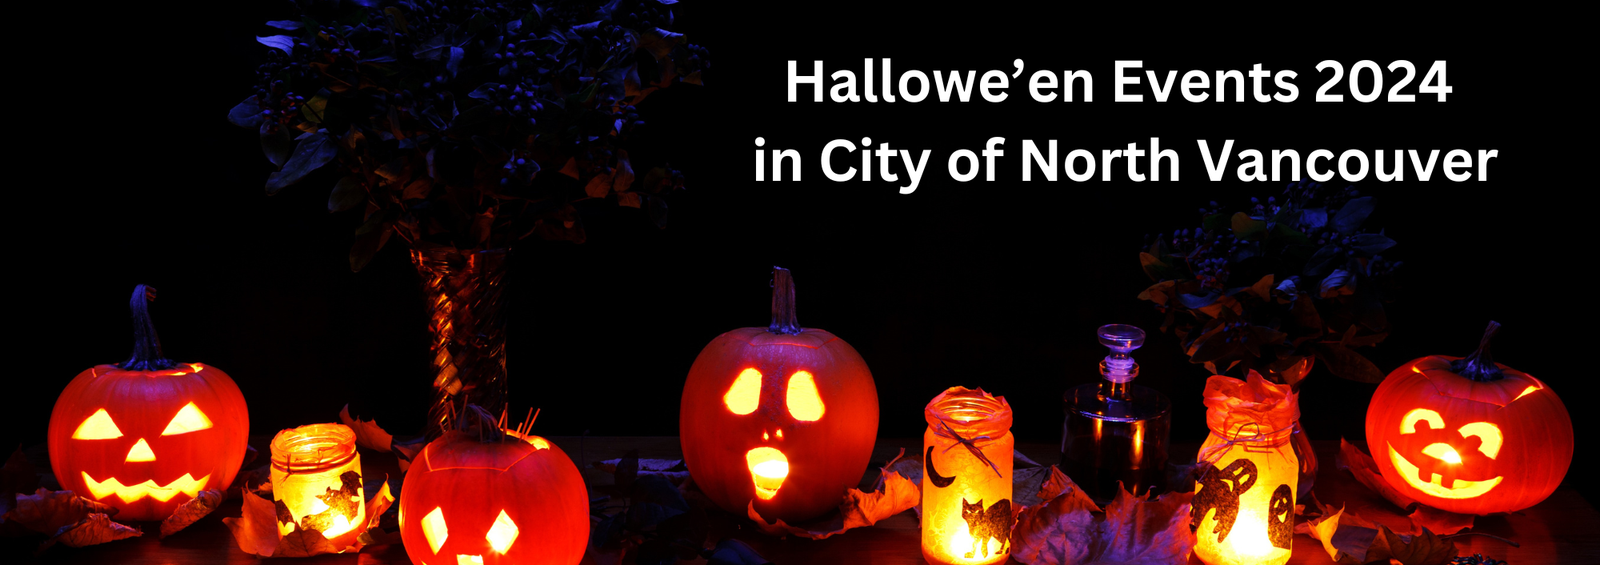 Hallowe'en Events In The City of North Vancouver 2024 - Kevin Lynch